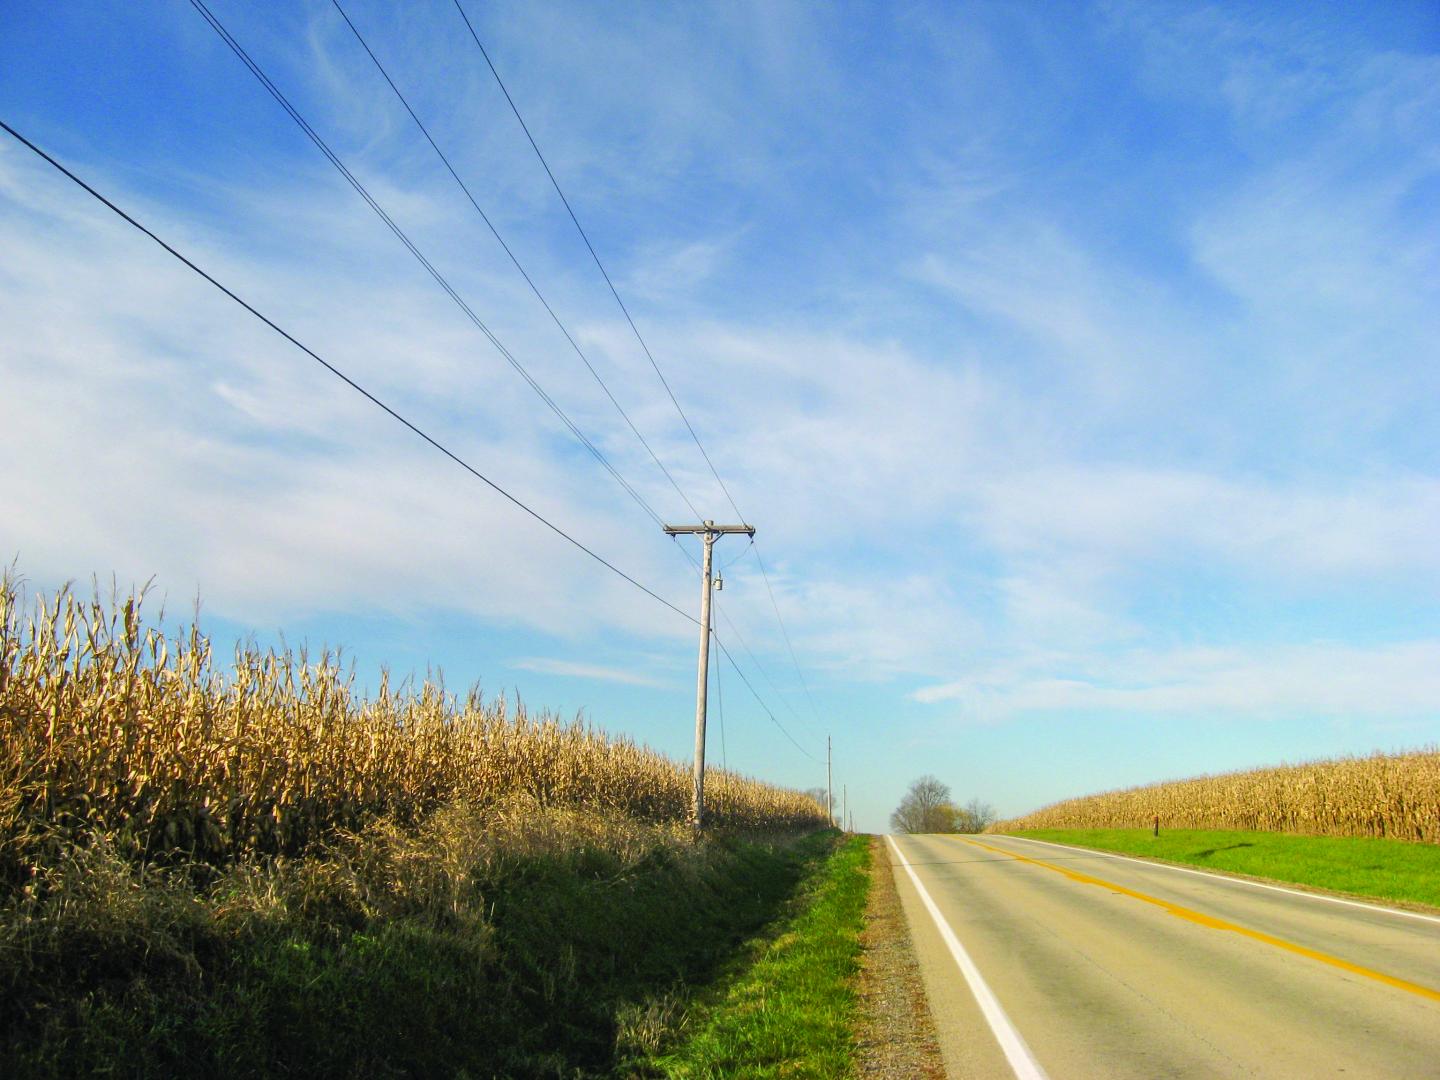 Power lines and corn fields